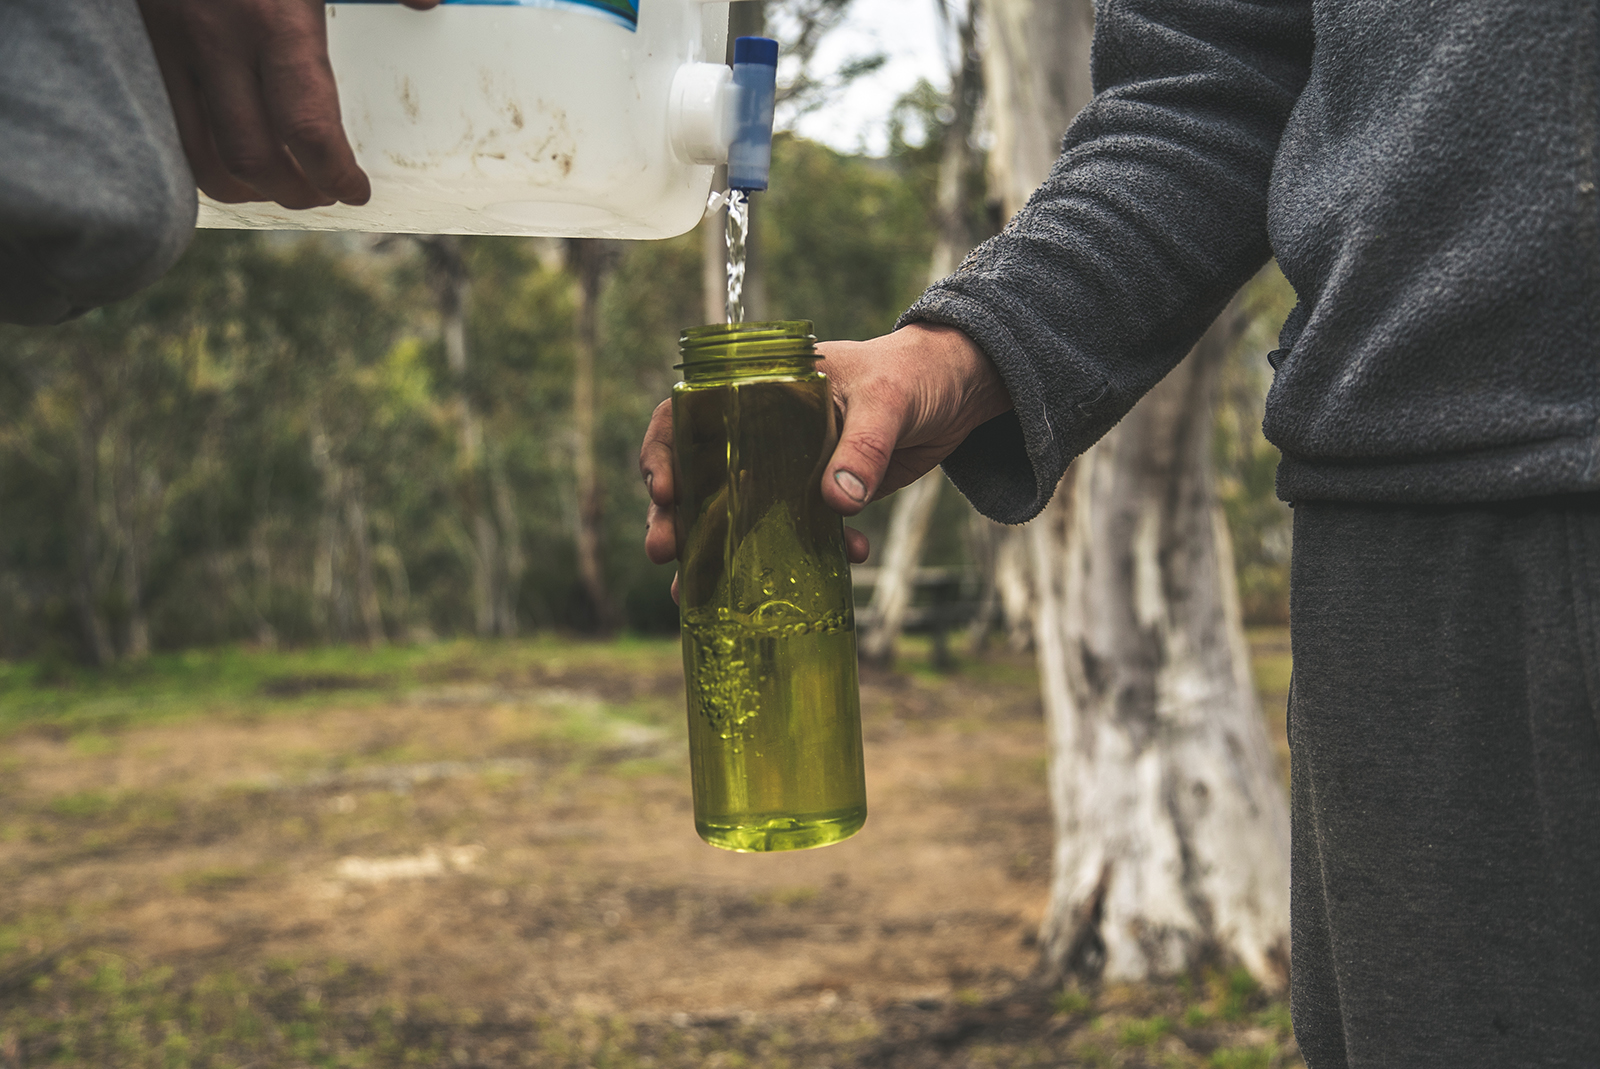 A person filling up their drink bottle with water. Photo: Daniel Parsons/DPIE